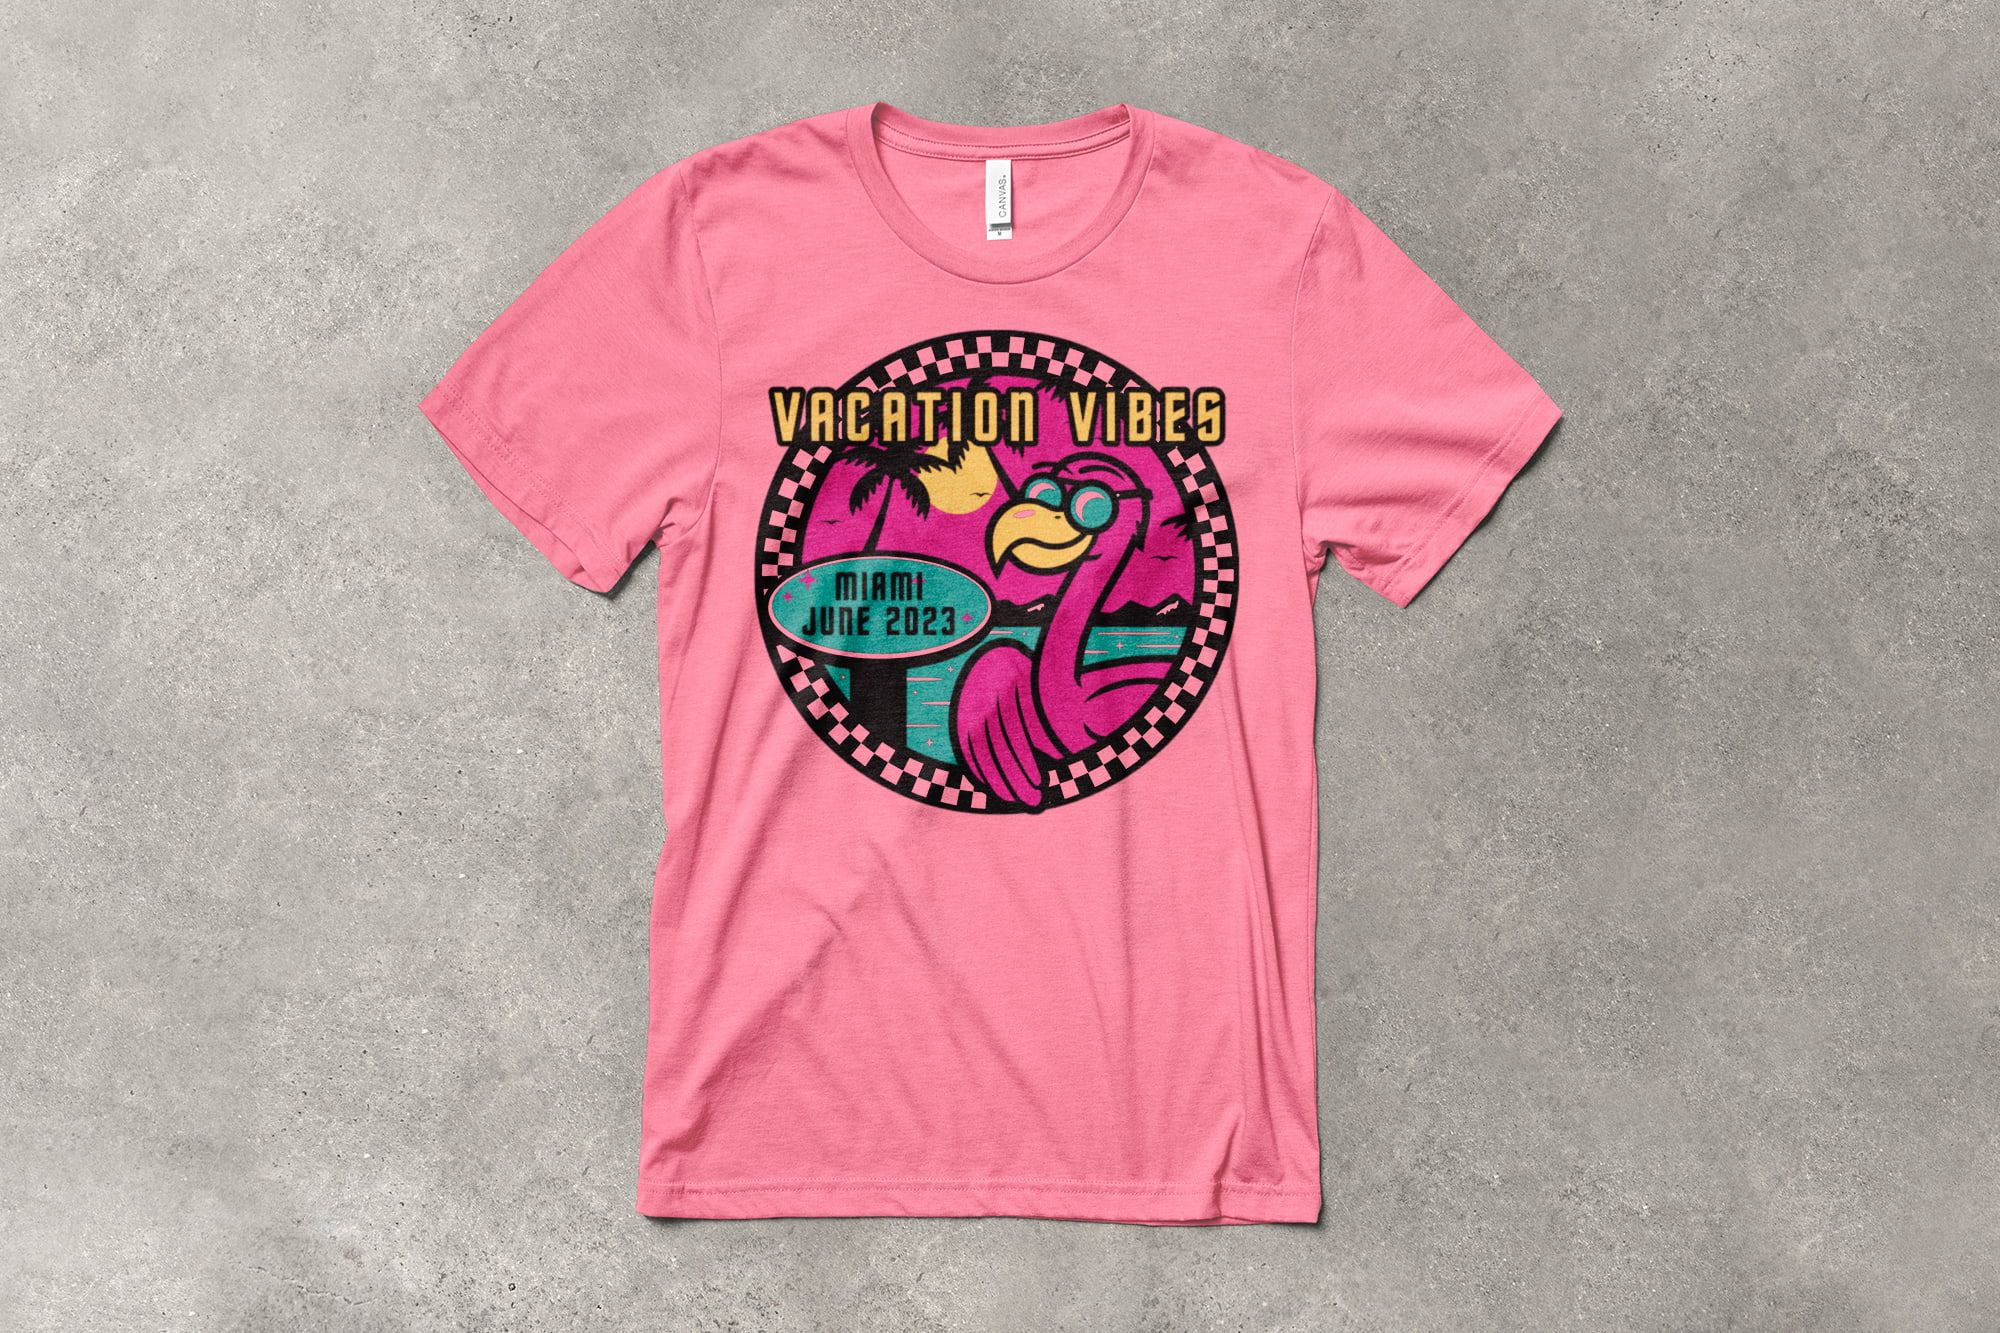 A bubblegum pink shirt with a playful vacation t-shirt design that features a bright magenta flamingo